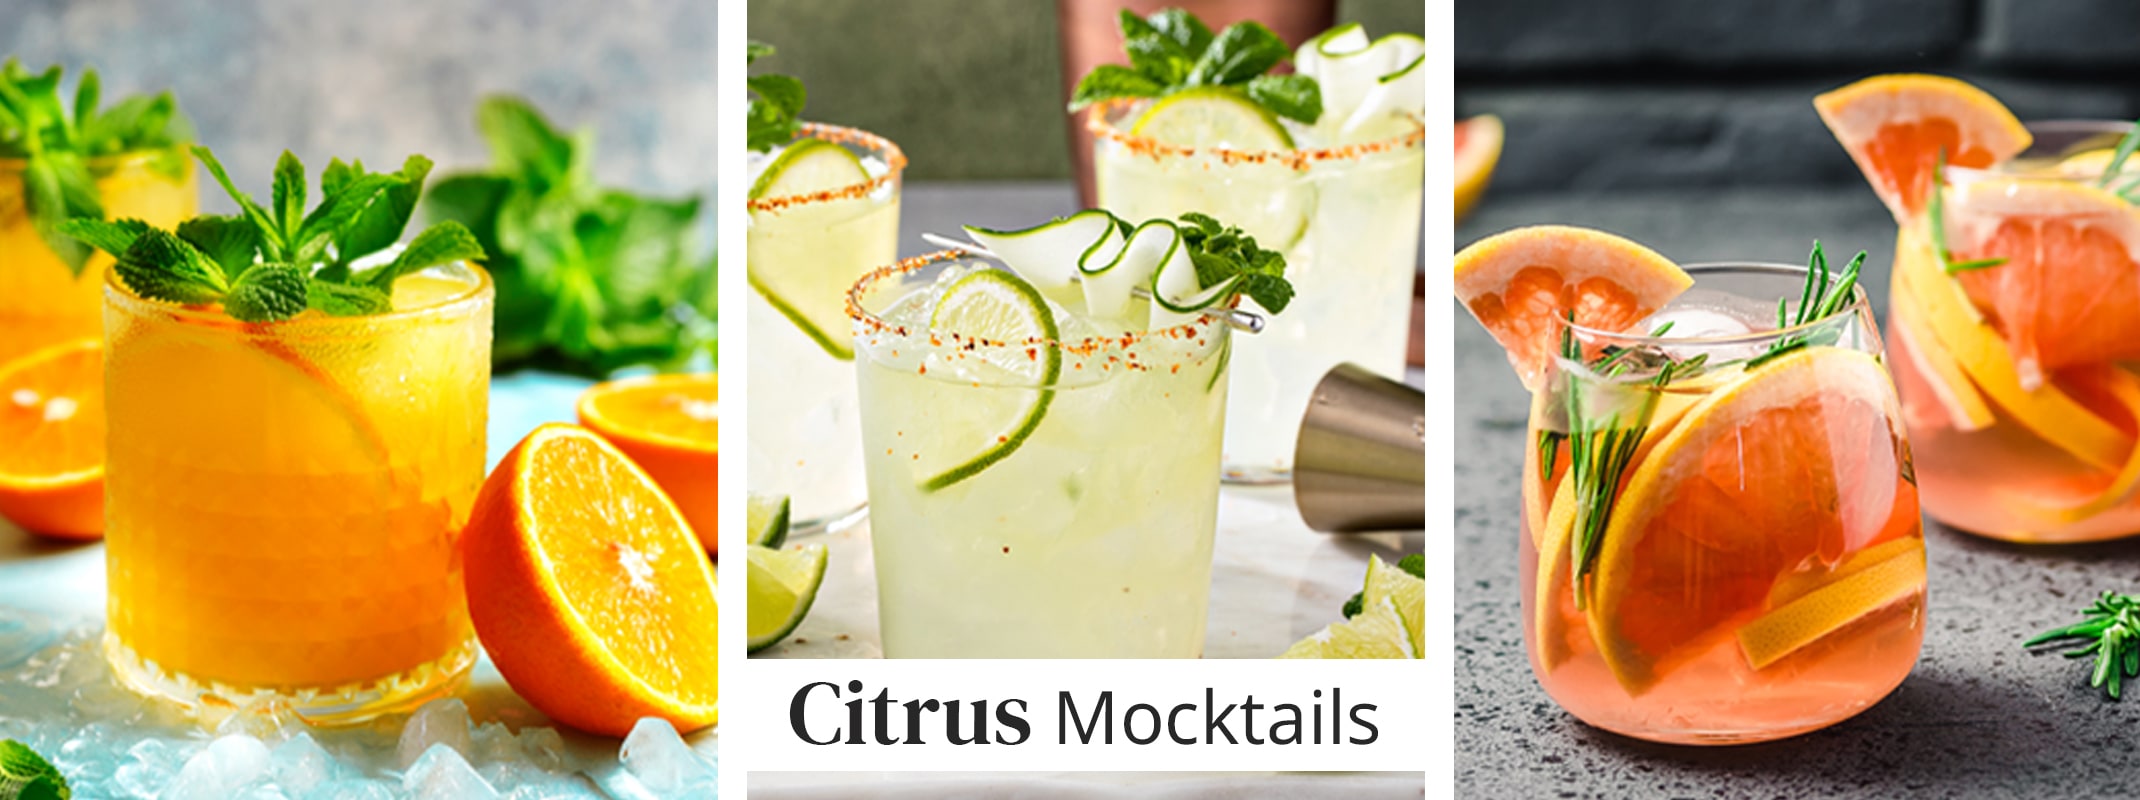 citrus mocktail drinks made with oranges, lime and grapefruit